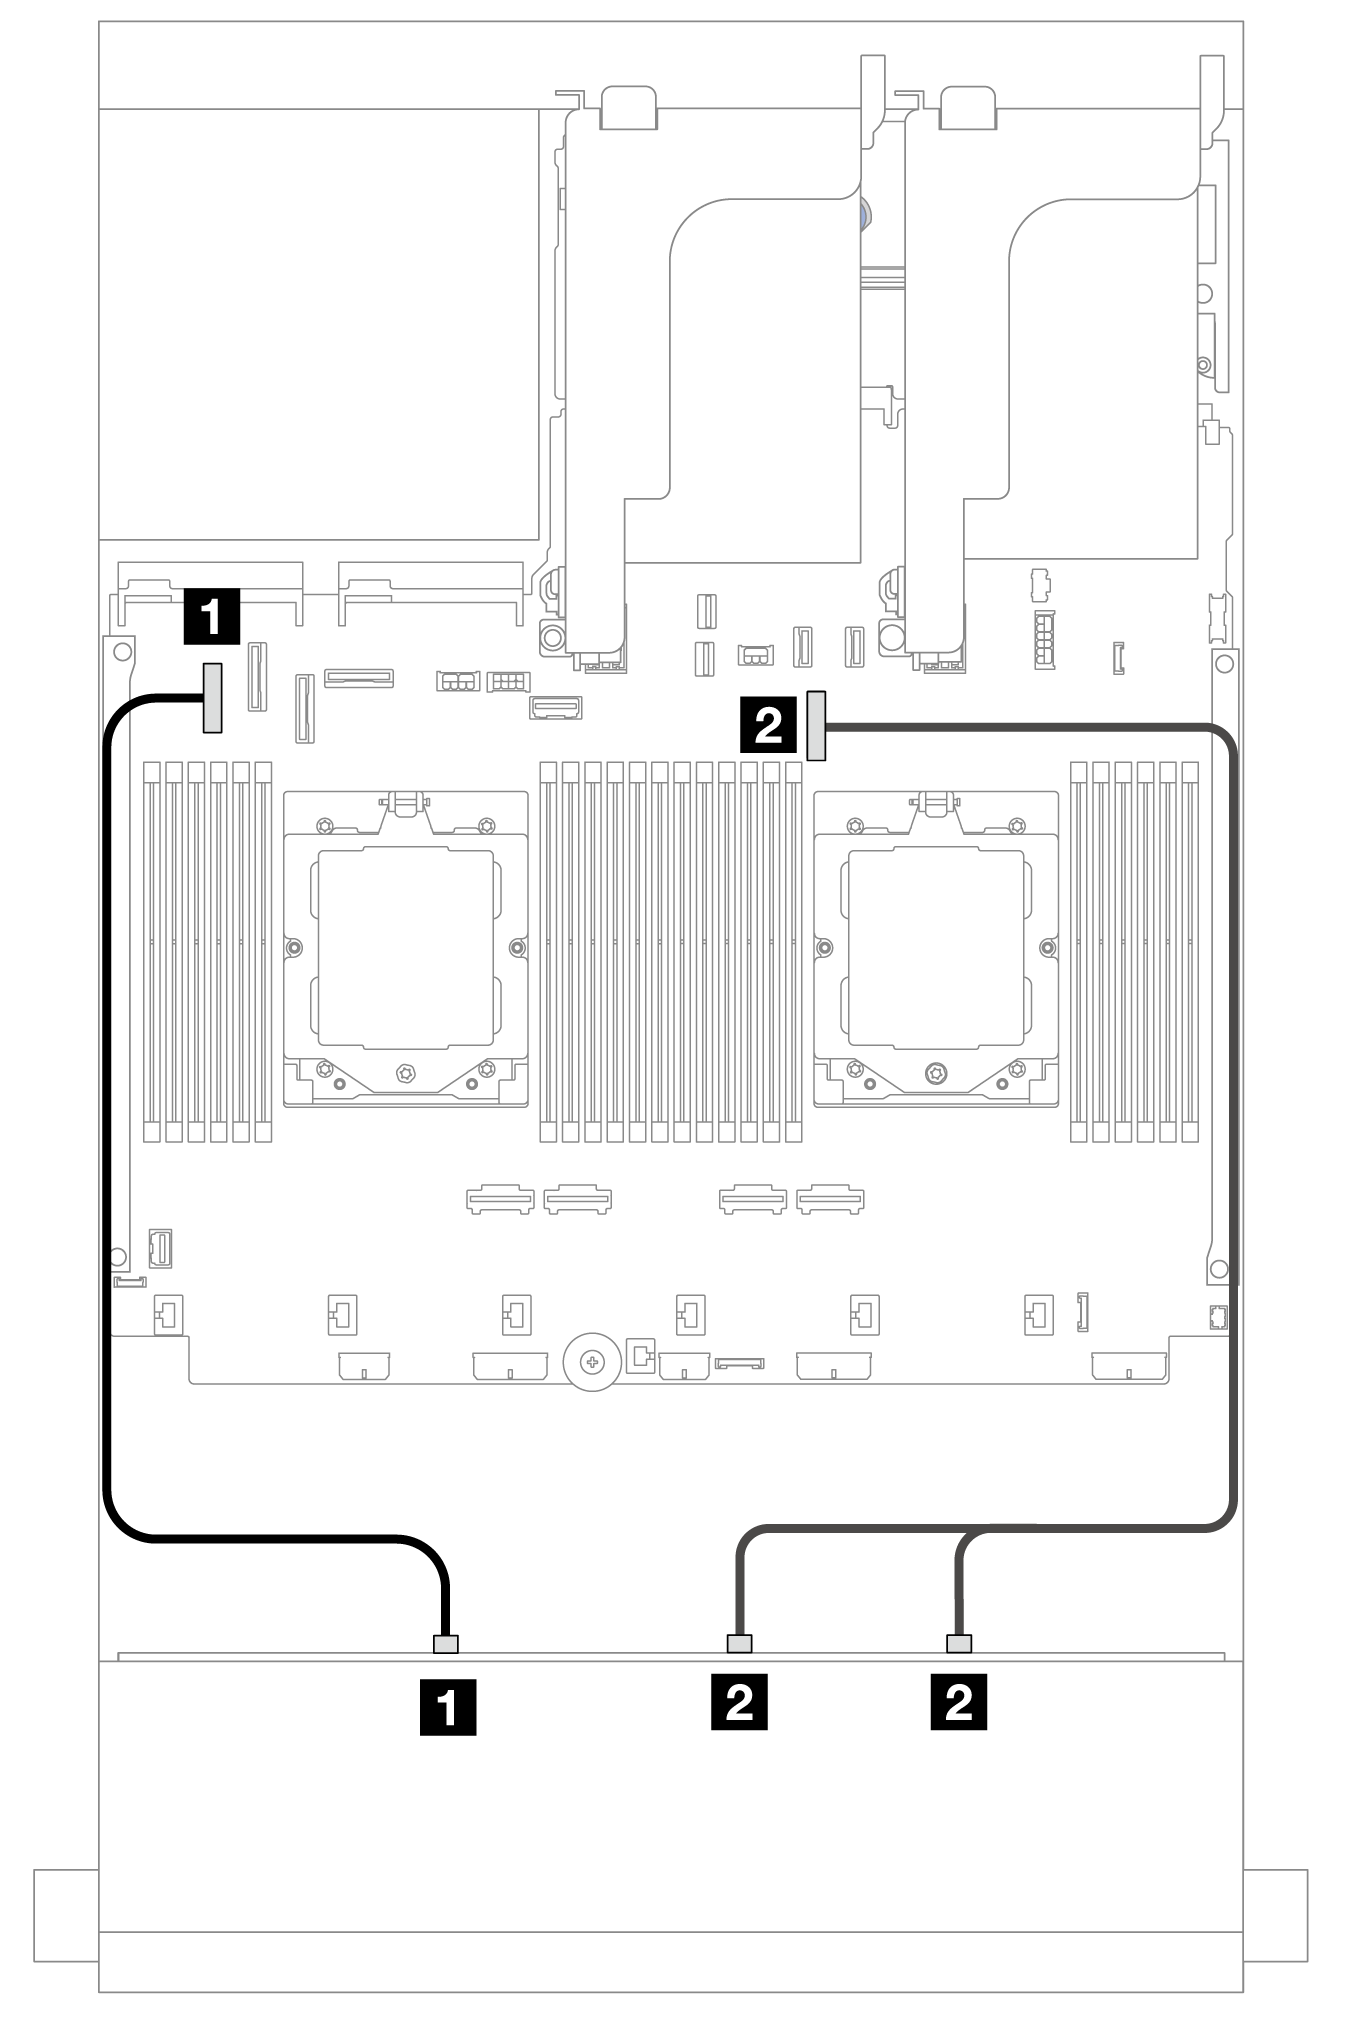 Cable routing to onboard SATA connectors when two processors installed